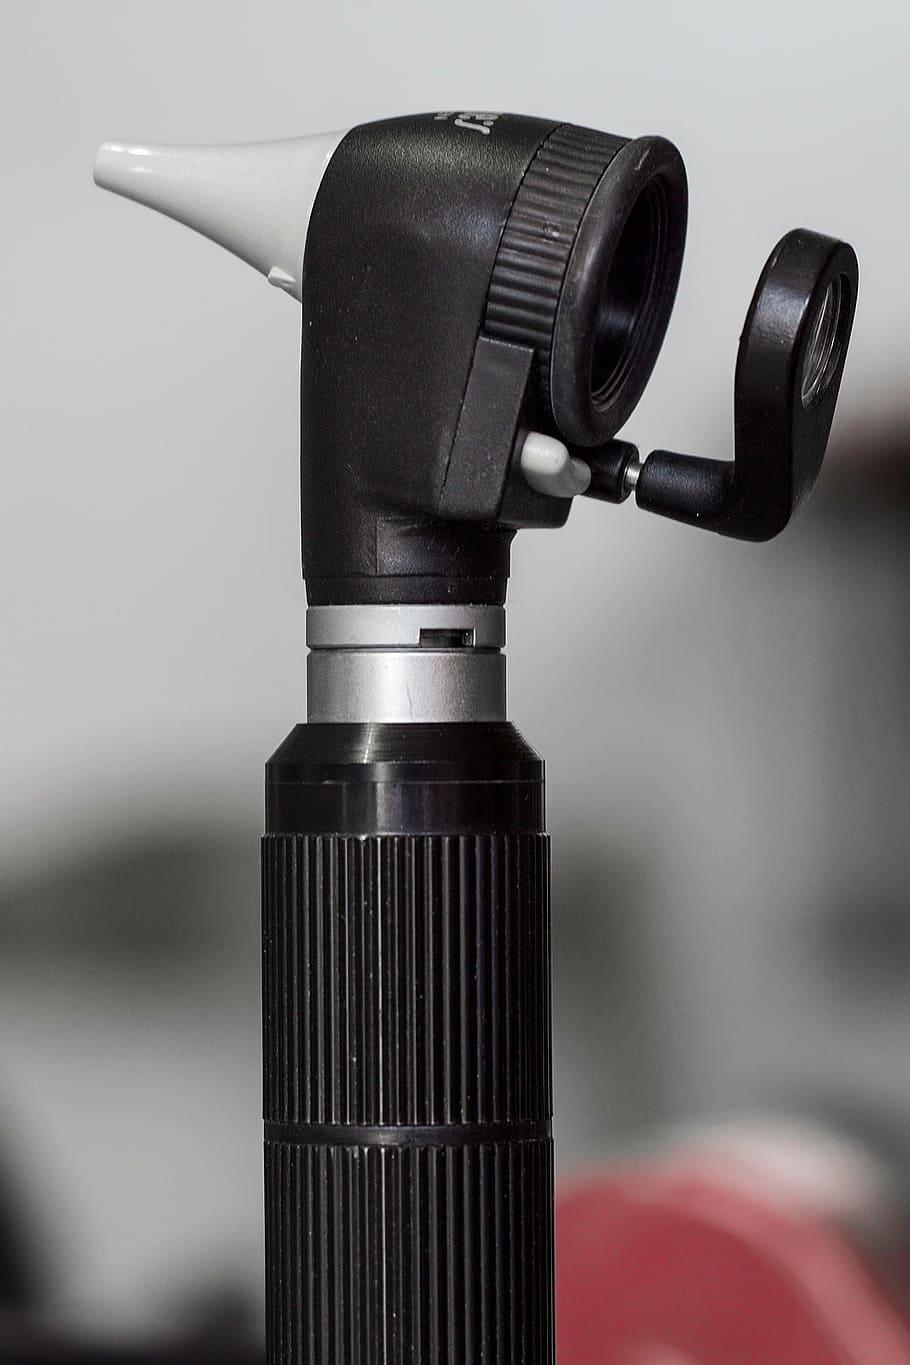 otoscope, ear examination, ear specialist, medical, diagnosis, equipment, technology, close-up, focus on foreground, photography themes